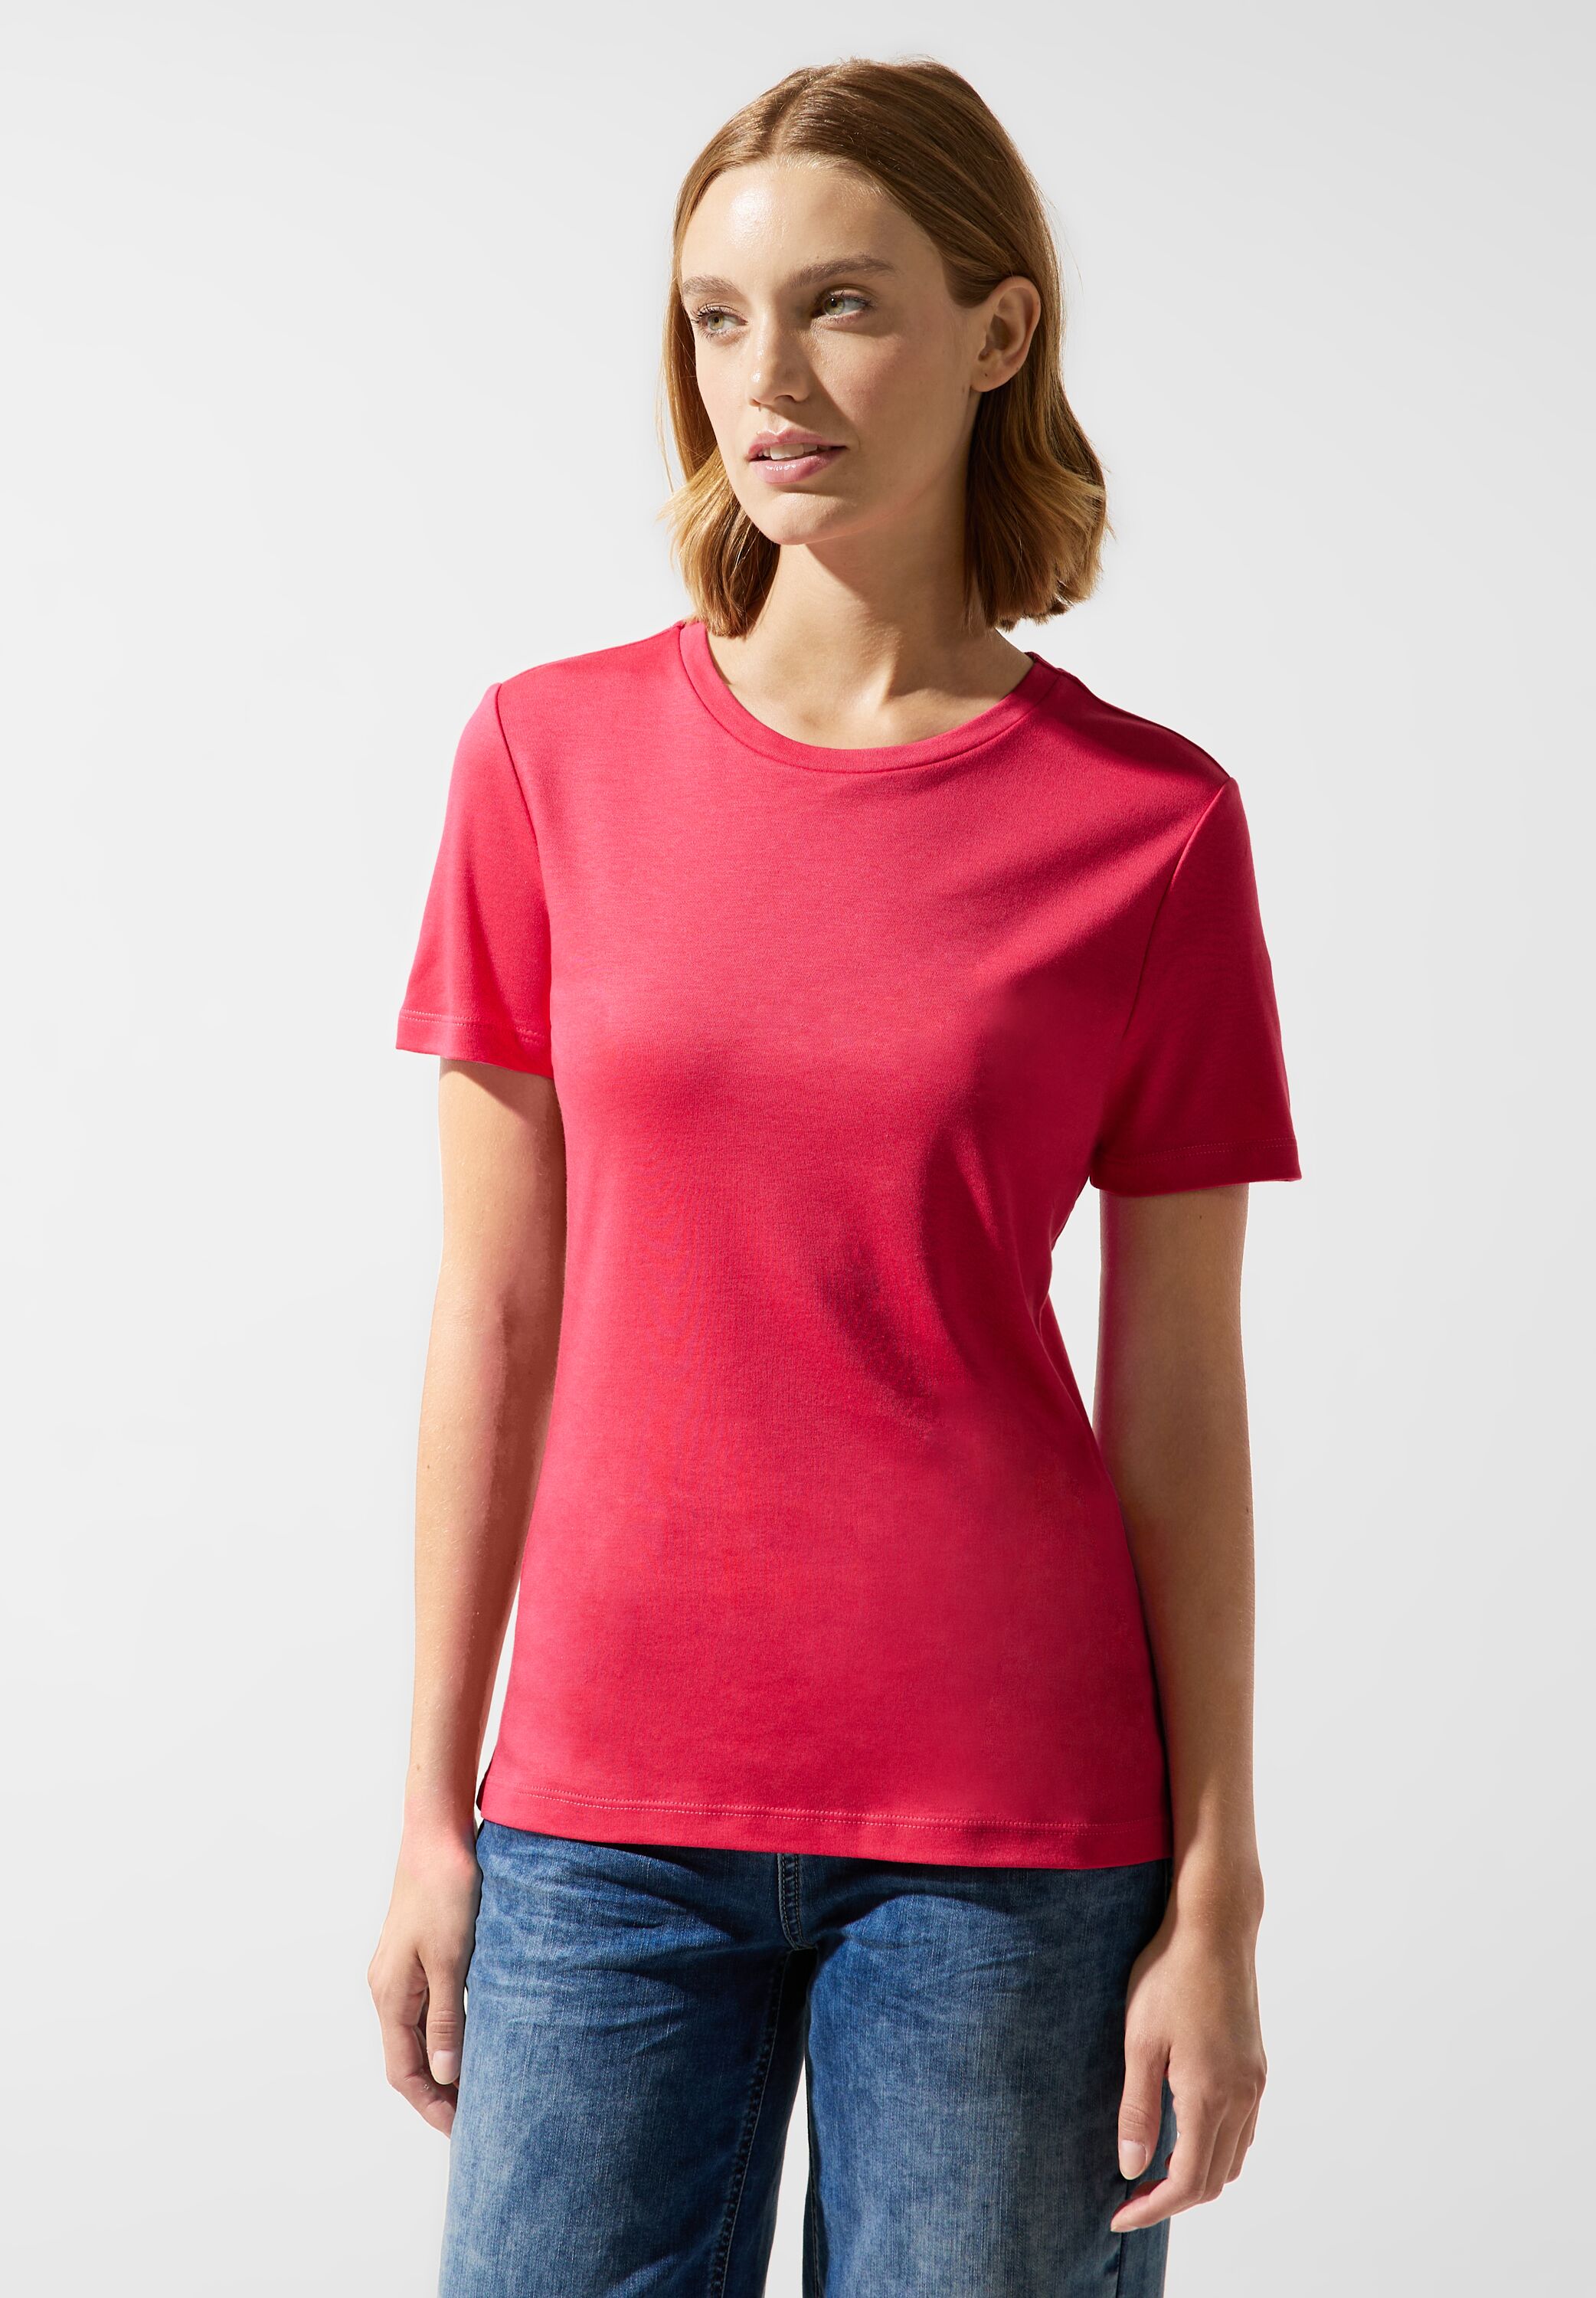 SALE reduziert A320321-15190 Blossom - T-Shirt Mode One Street in Coral CONCEPT im